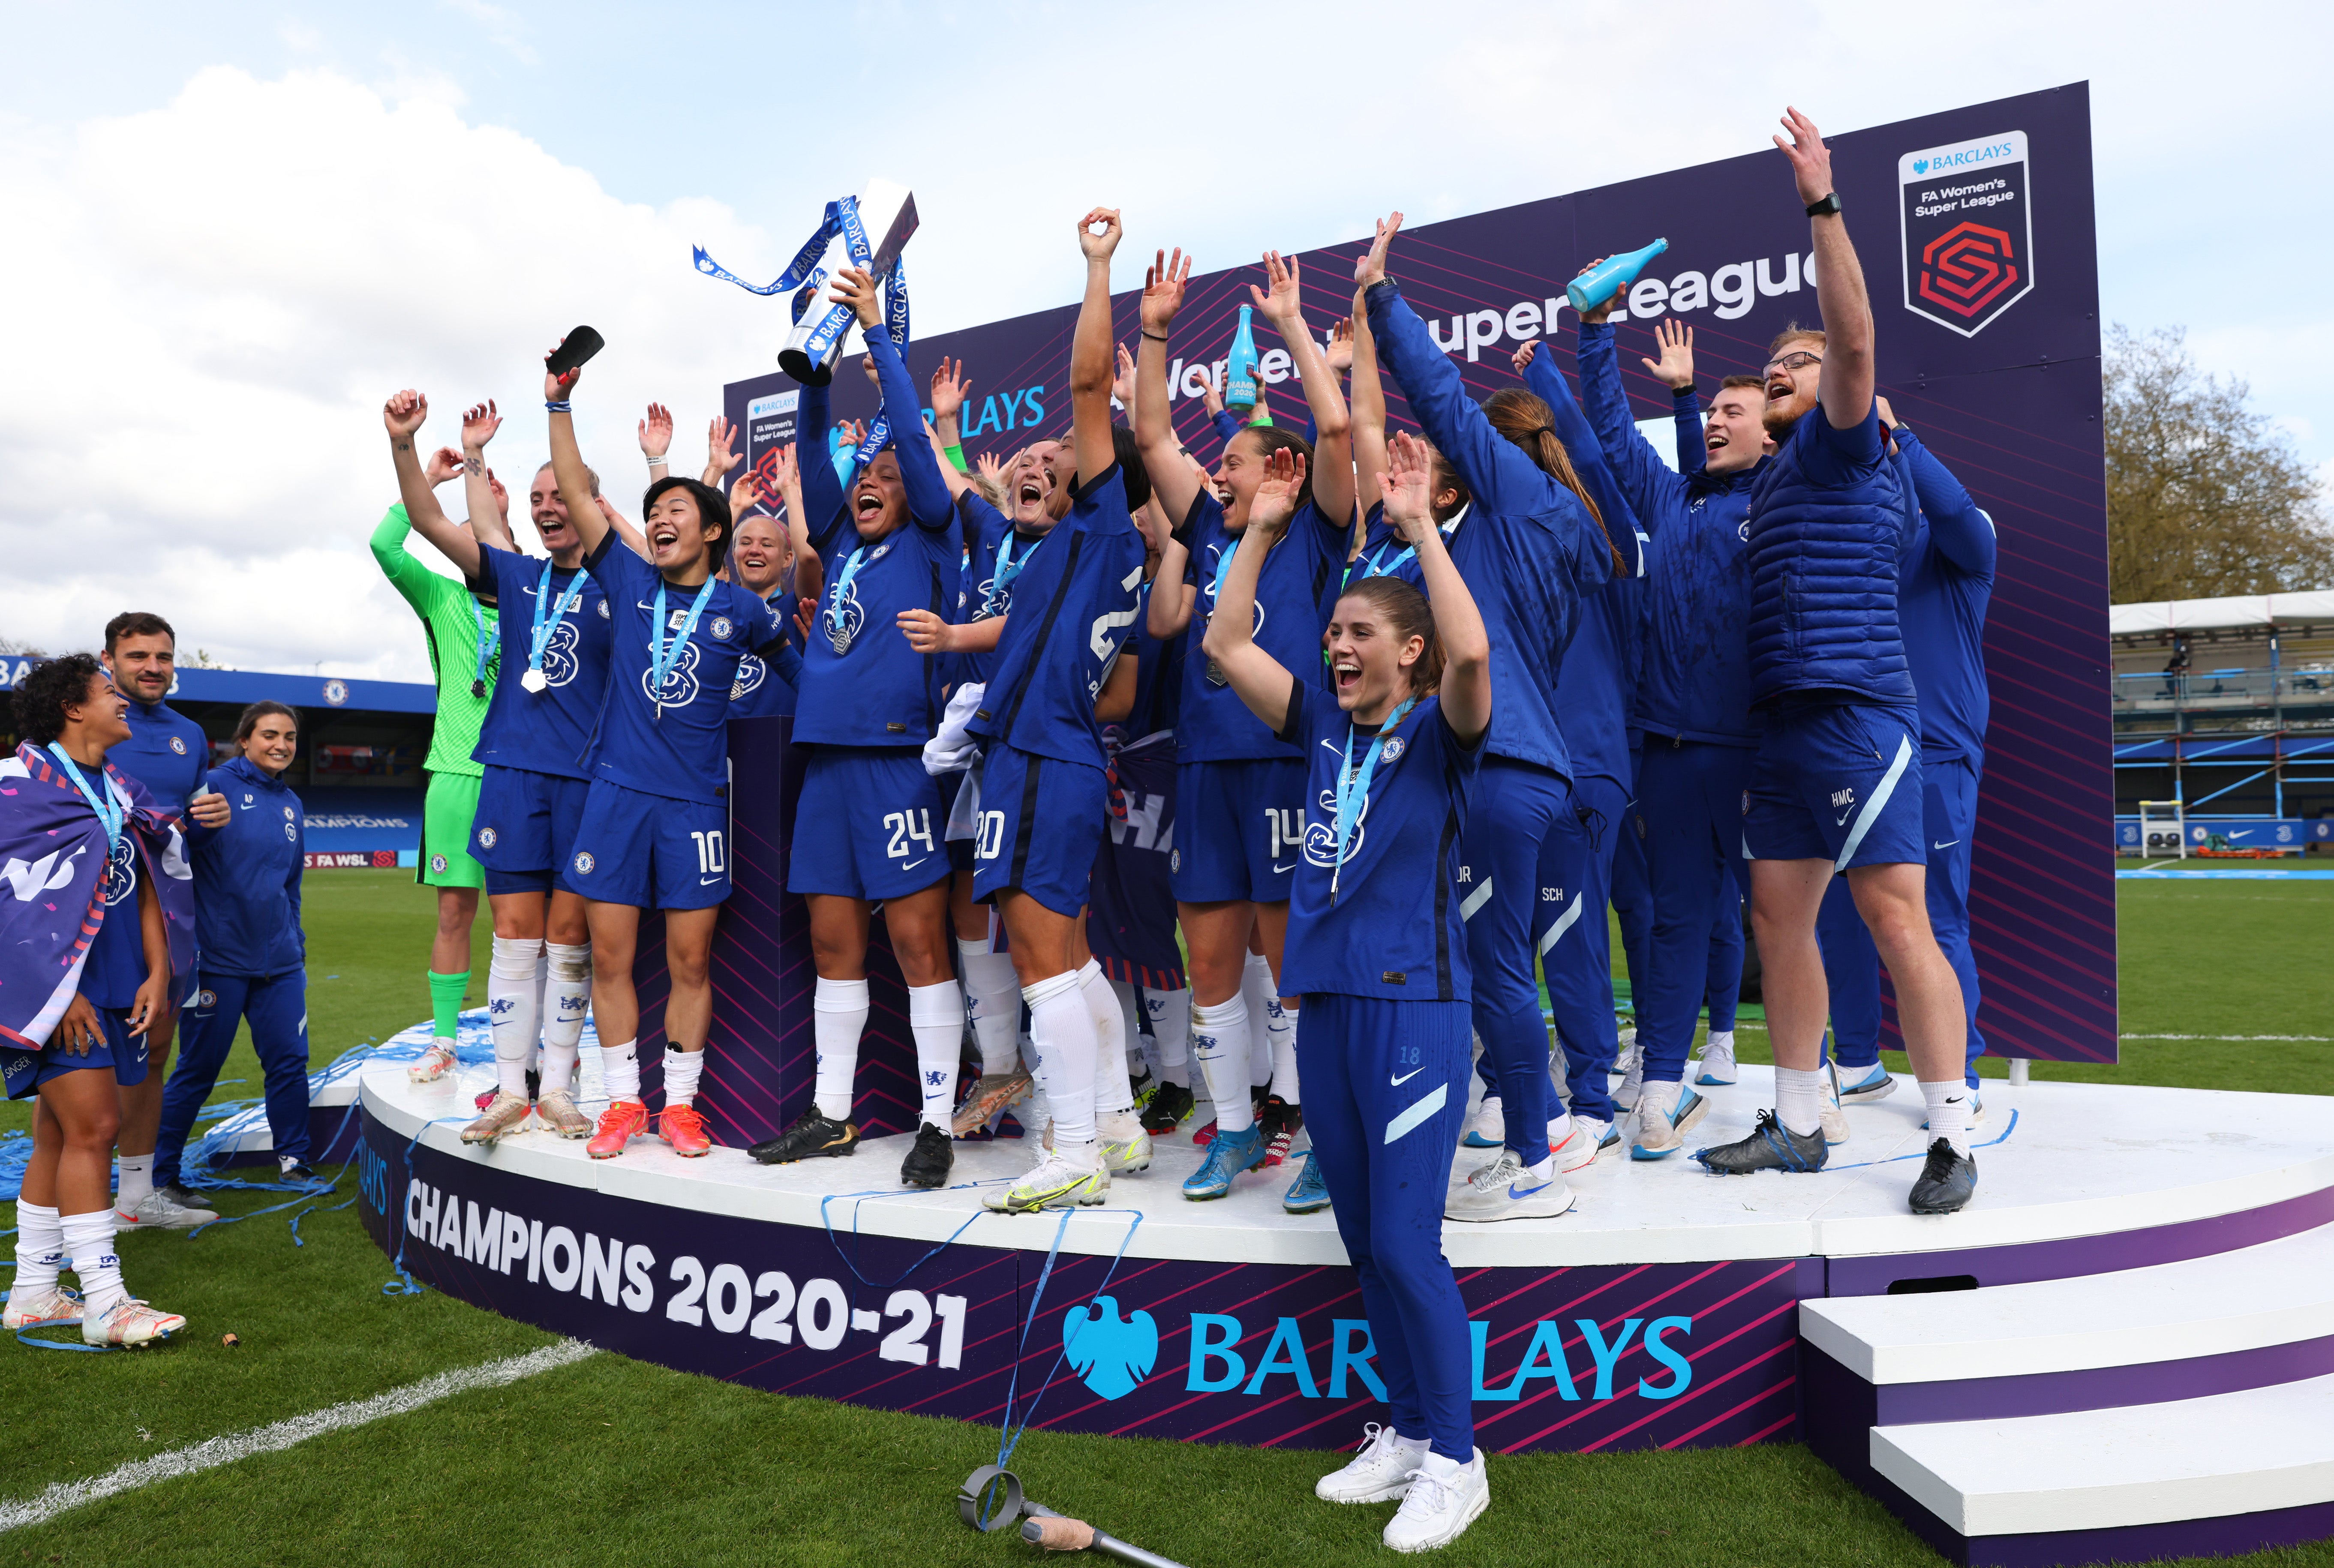 Chelsea wrapped up the Women’s Super League title in style with victory over Reading